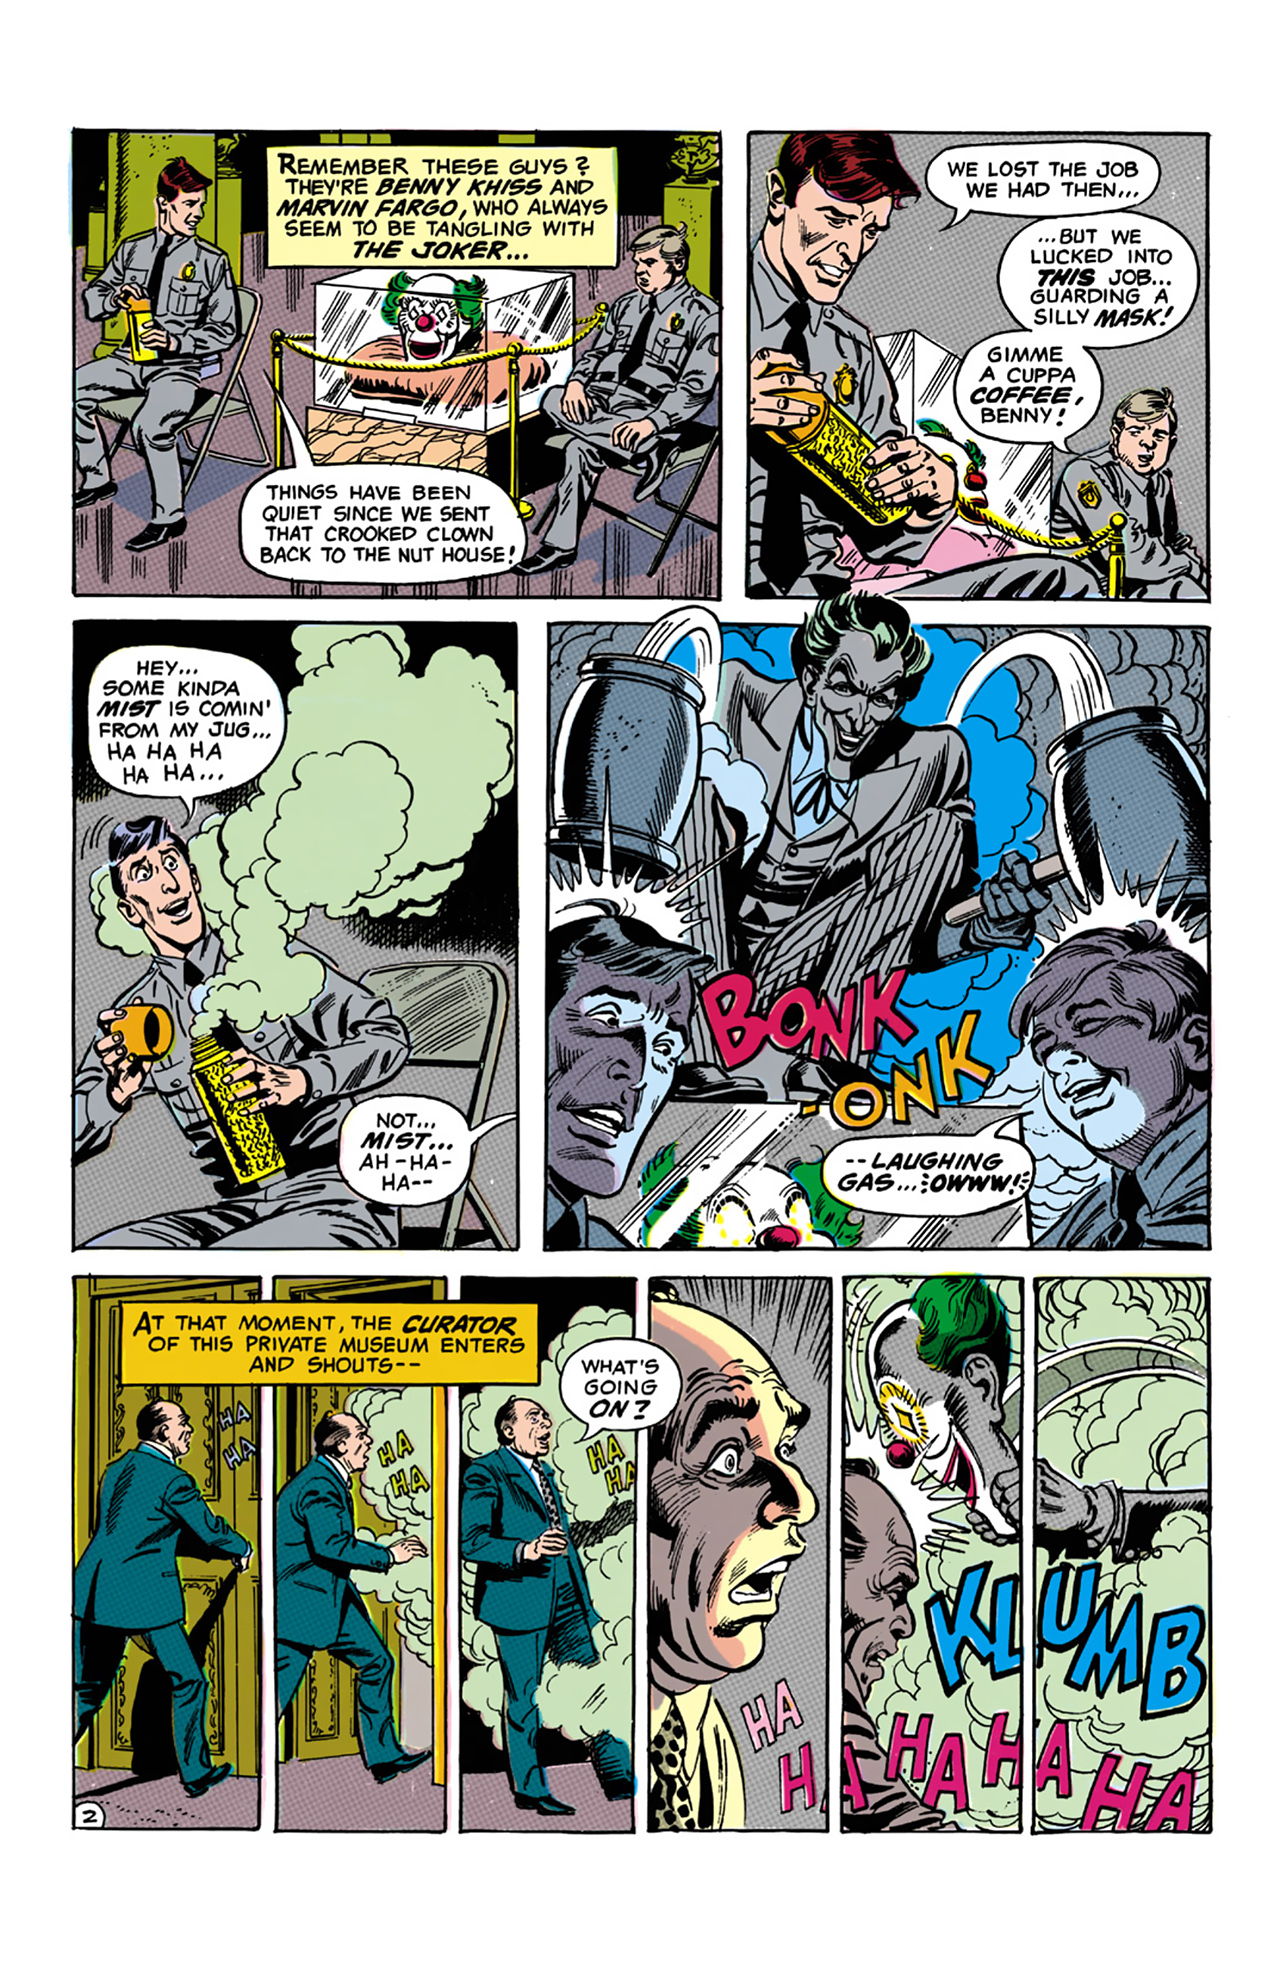 The Joker (1975-1976 + 2019): Chapter 3 - Page 3